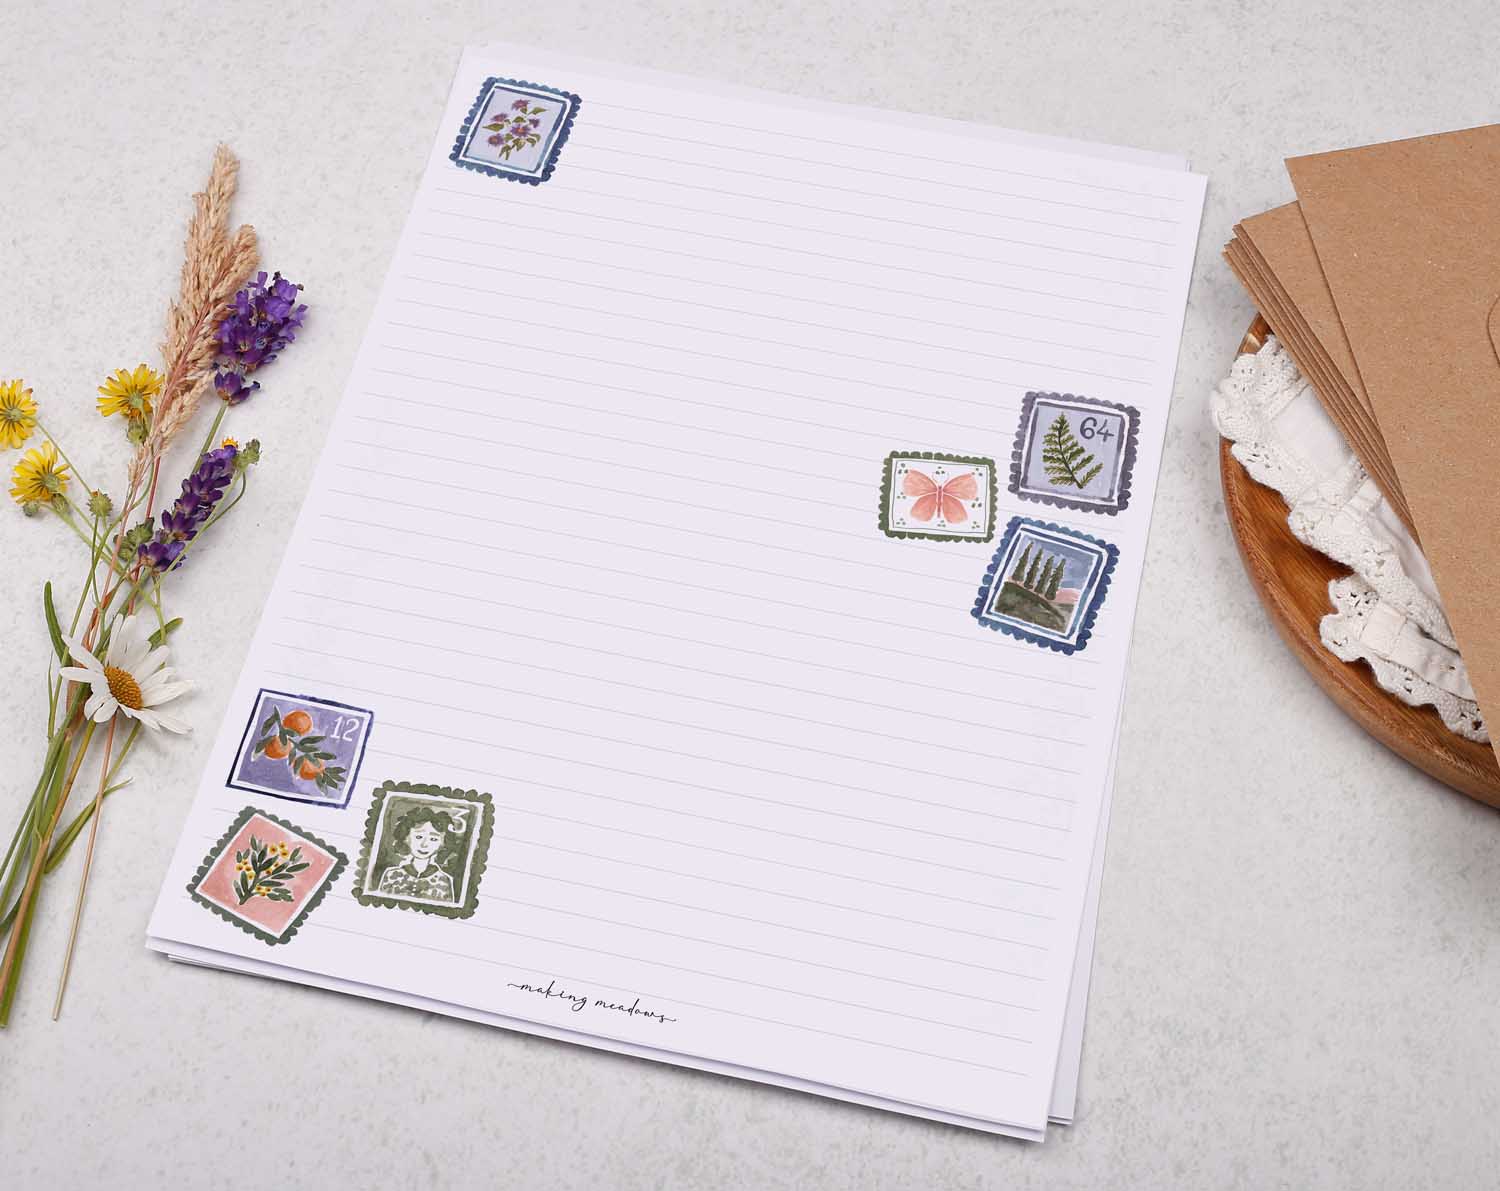 A4 letter writing paper sheets with a pretty scattering of floral postage stamps. The delicate floral watercolour stamp designs cascade around the letter paper edge.